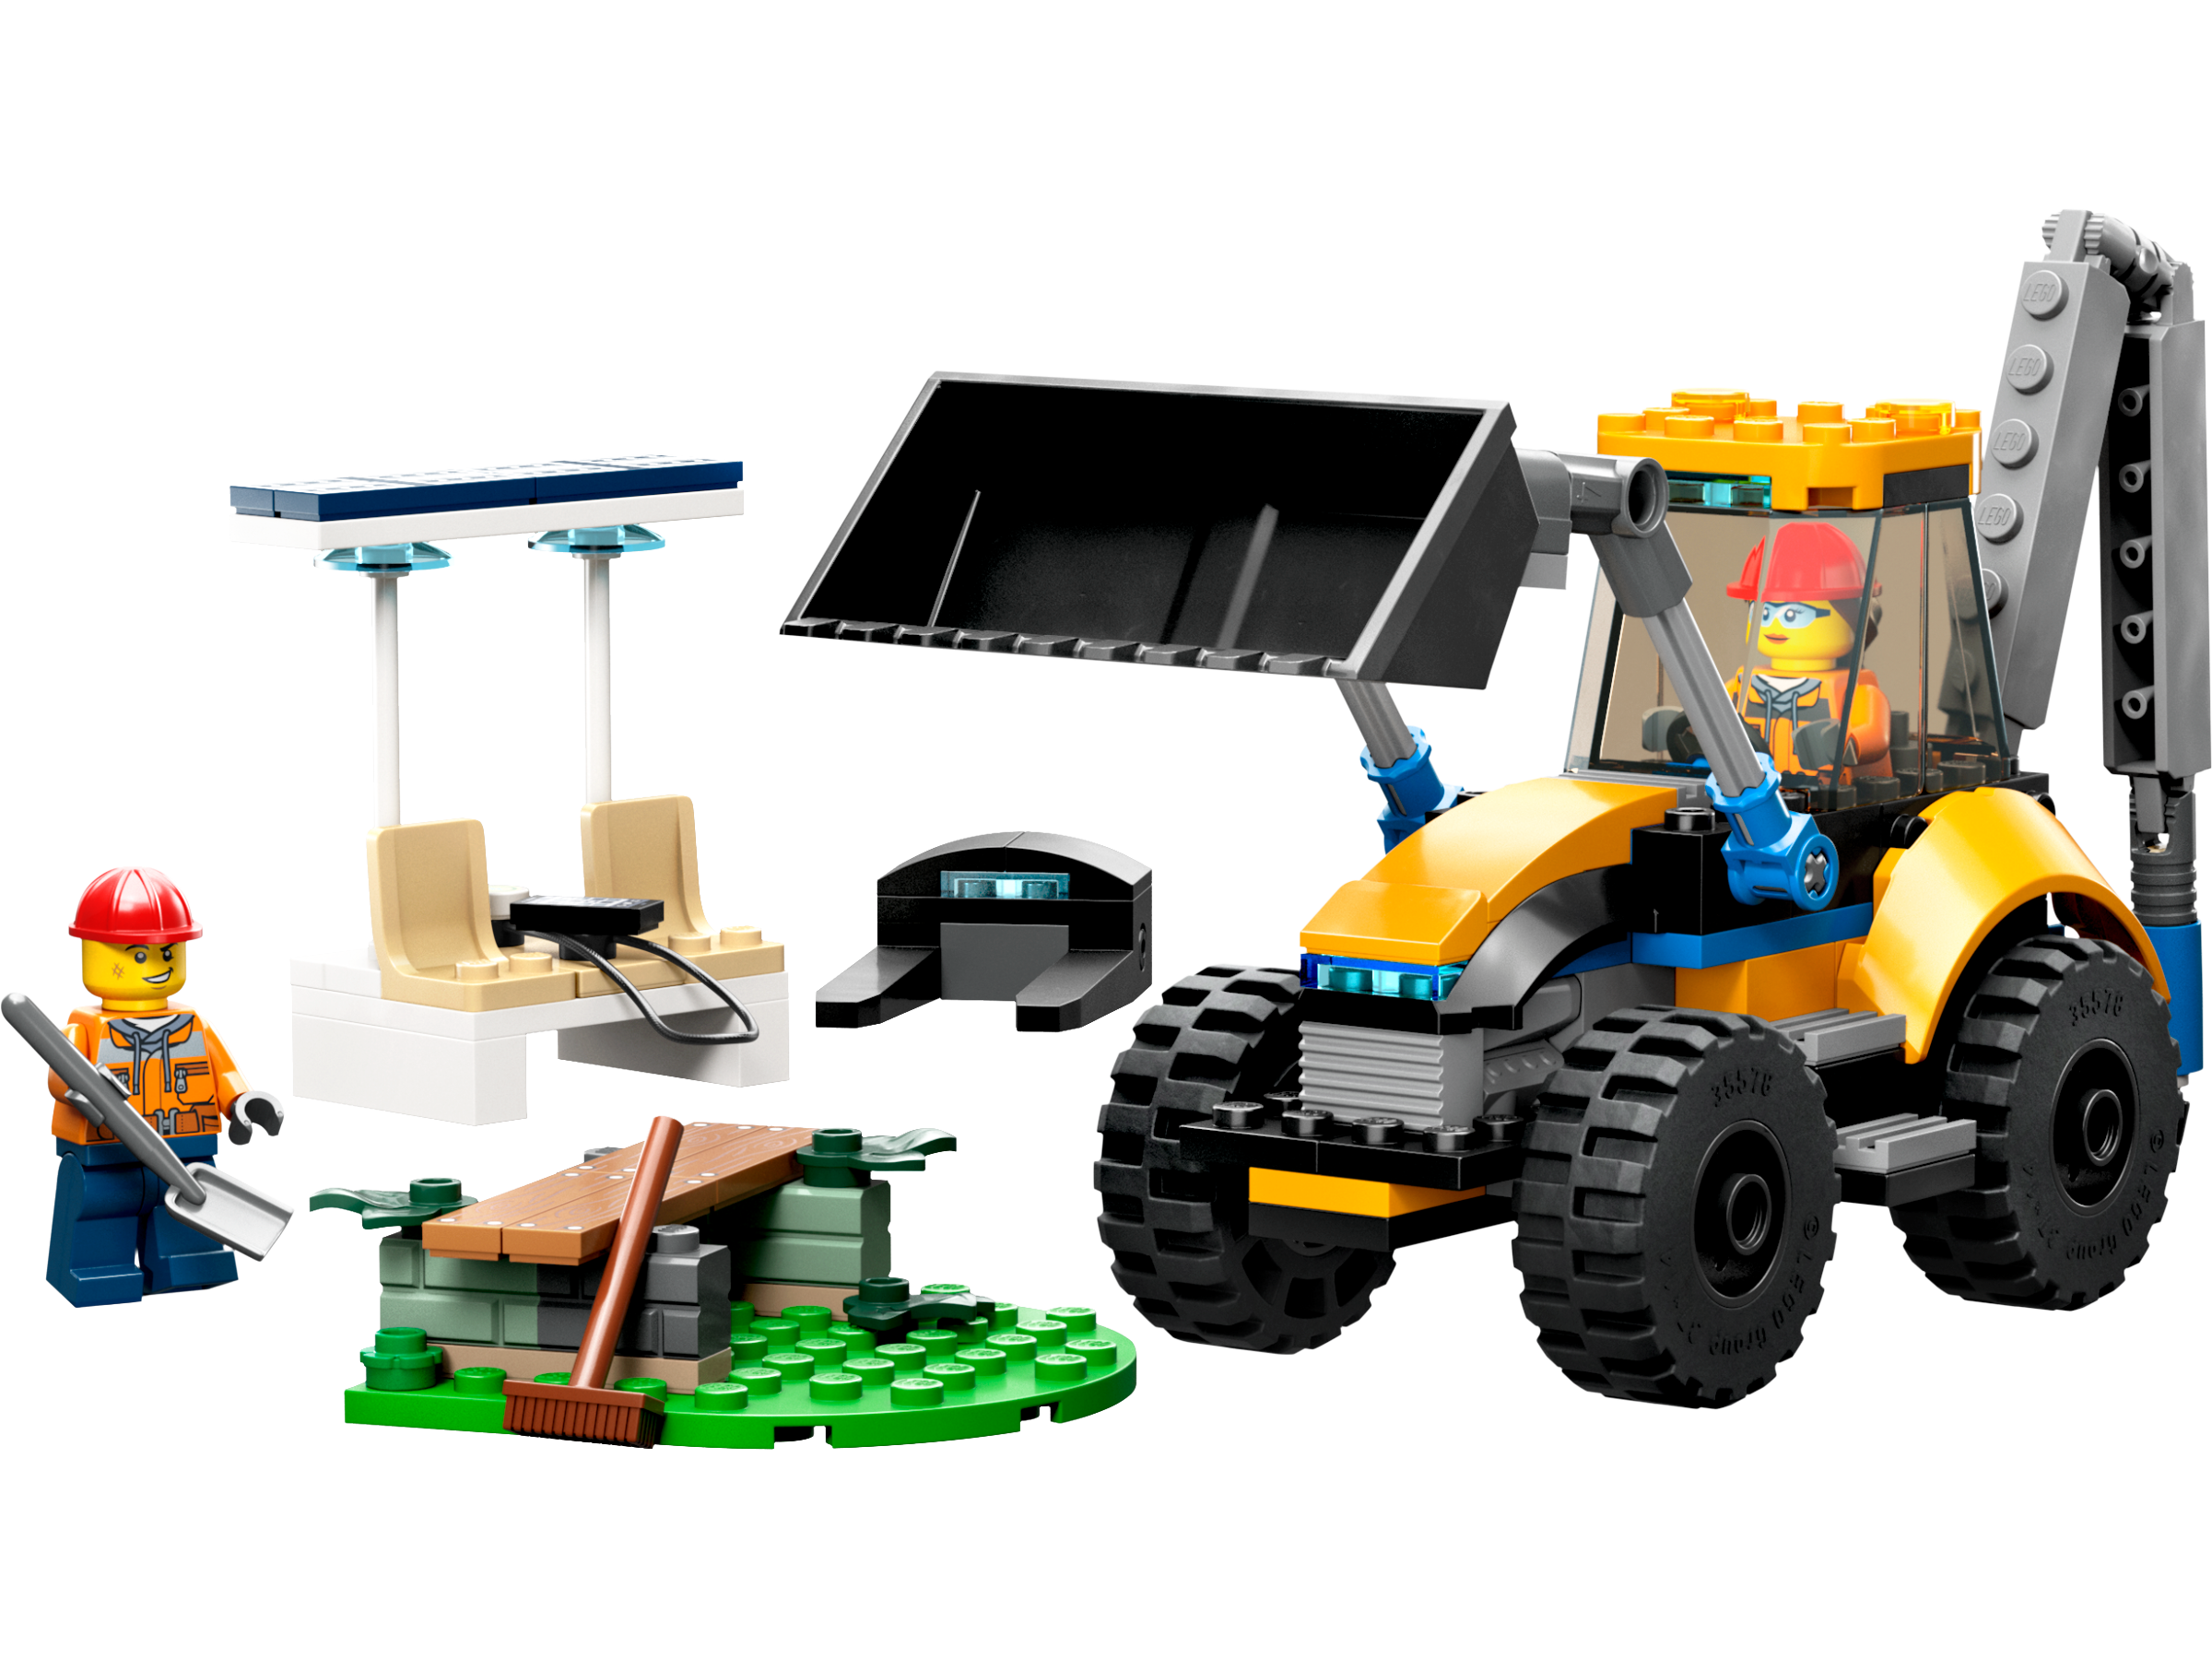 Construction Digger 60385 | City | Buy online at the Official LEGO® Shop US